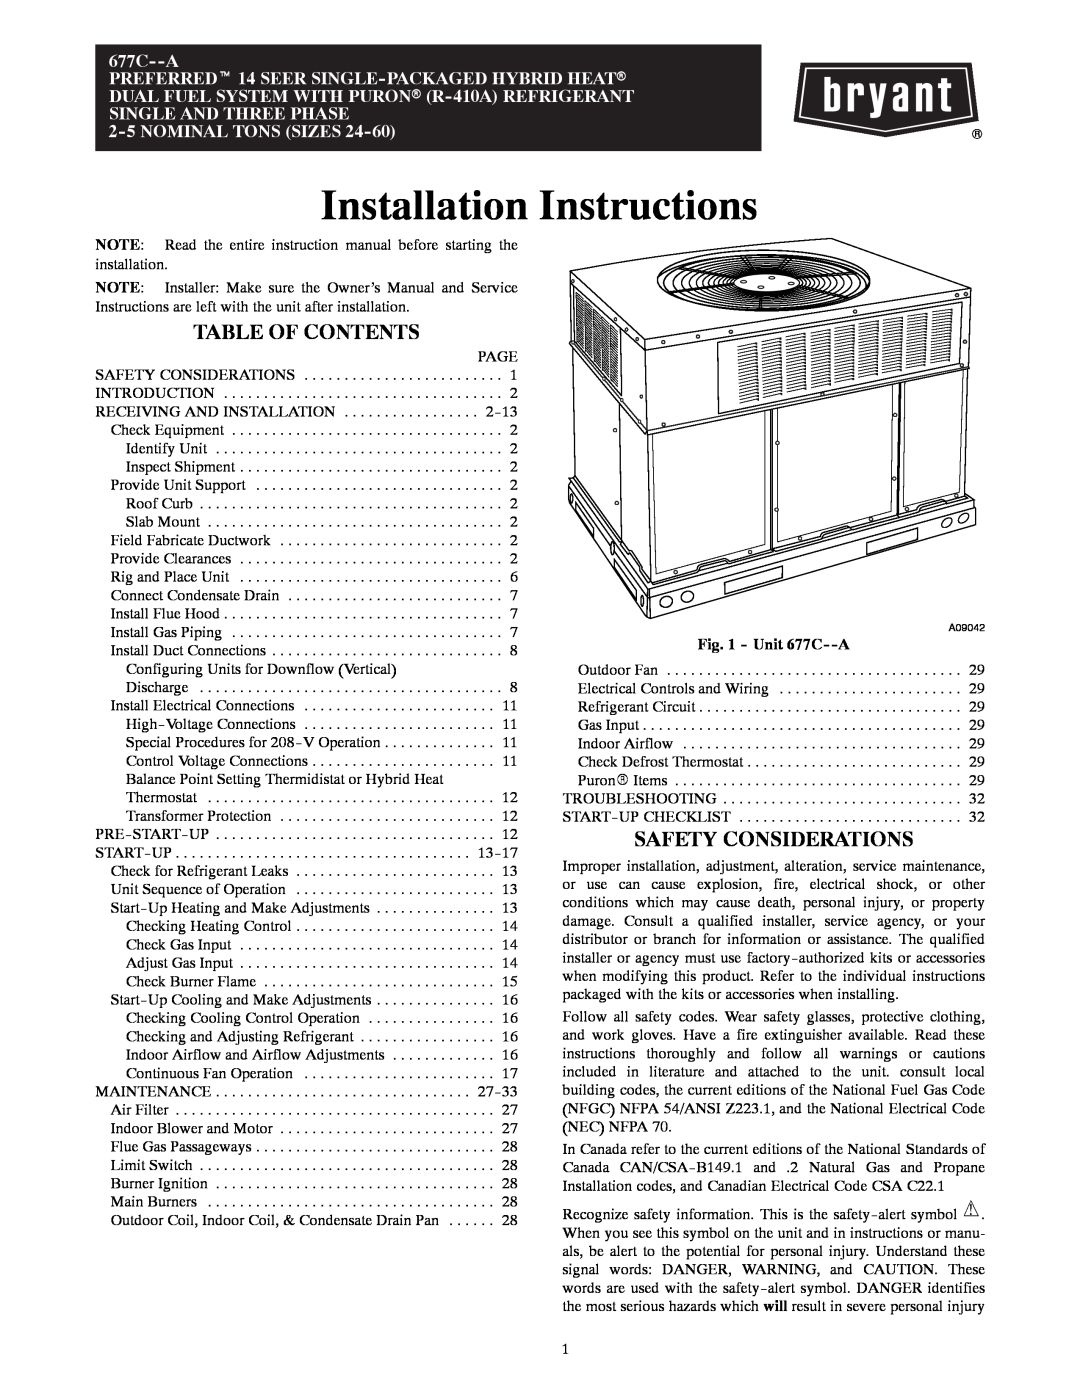 Bryant installation instructions Table Of Contents, Safety Considerations, Unit 677C--A, Installation Instructions 